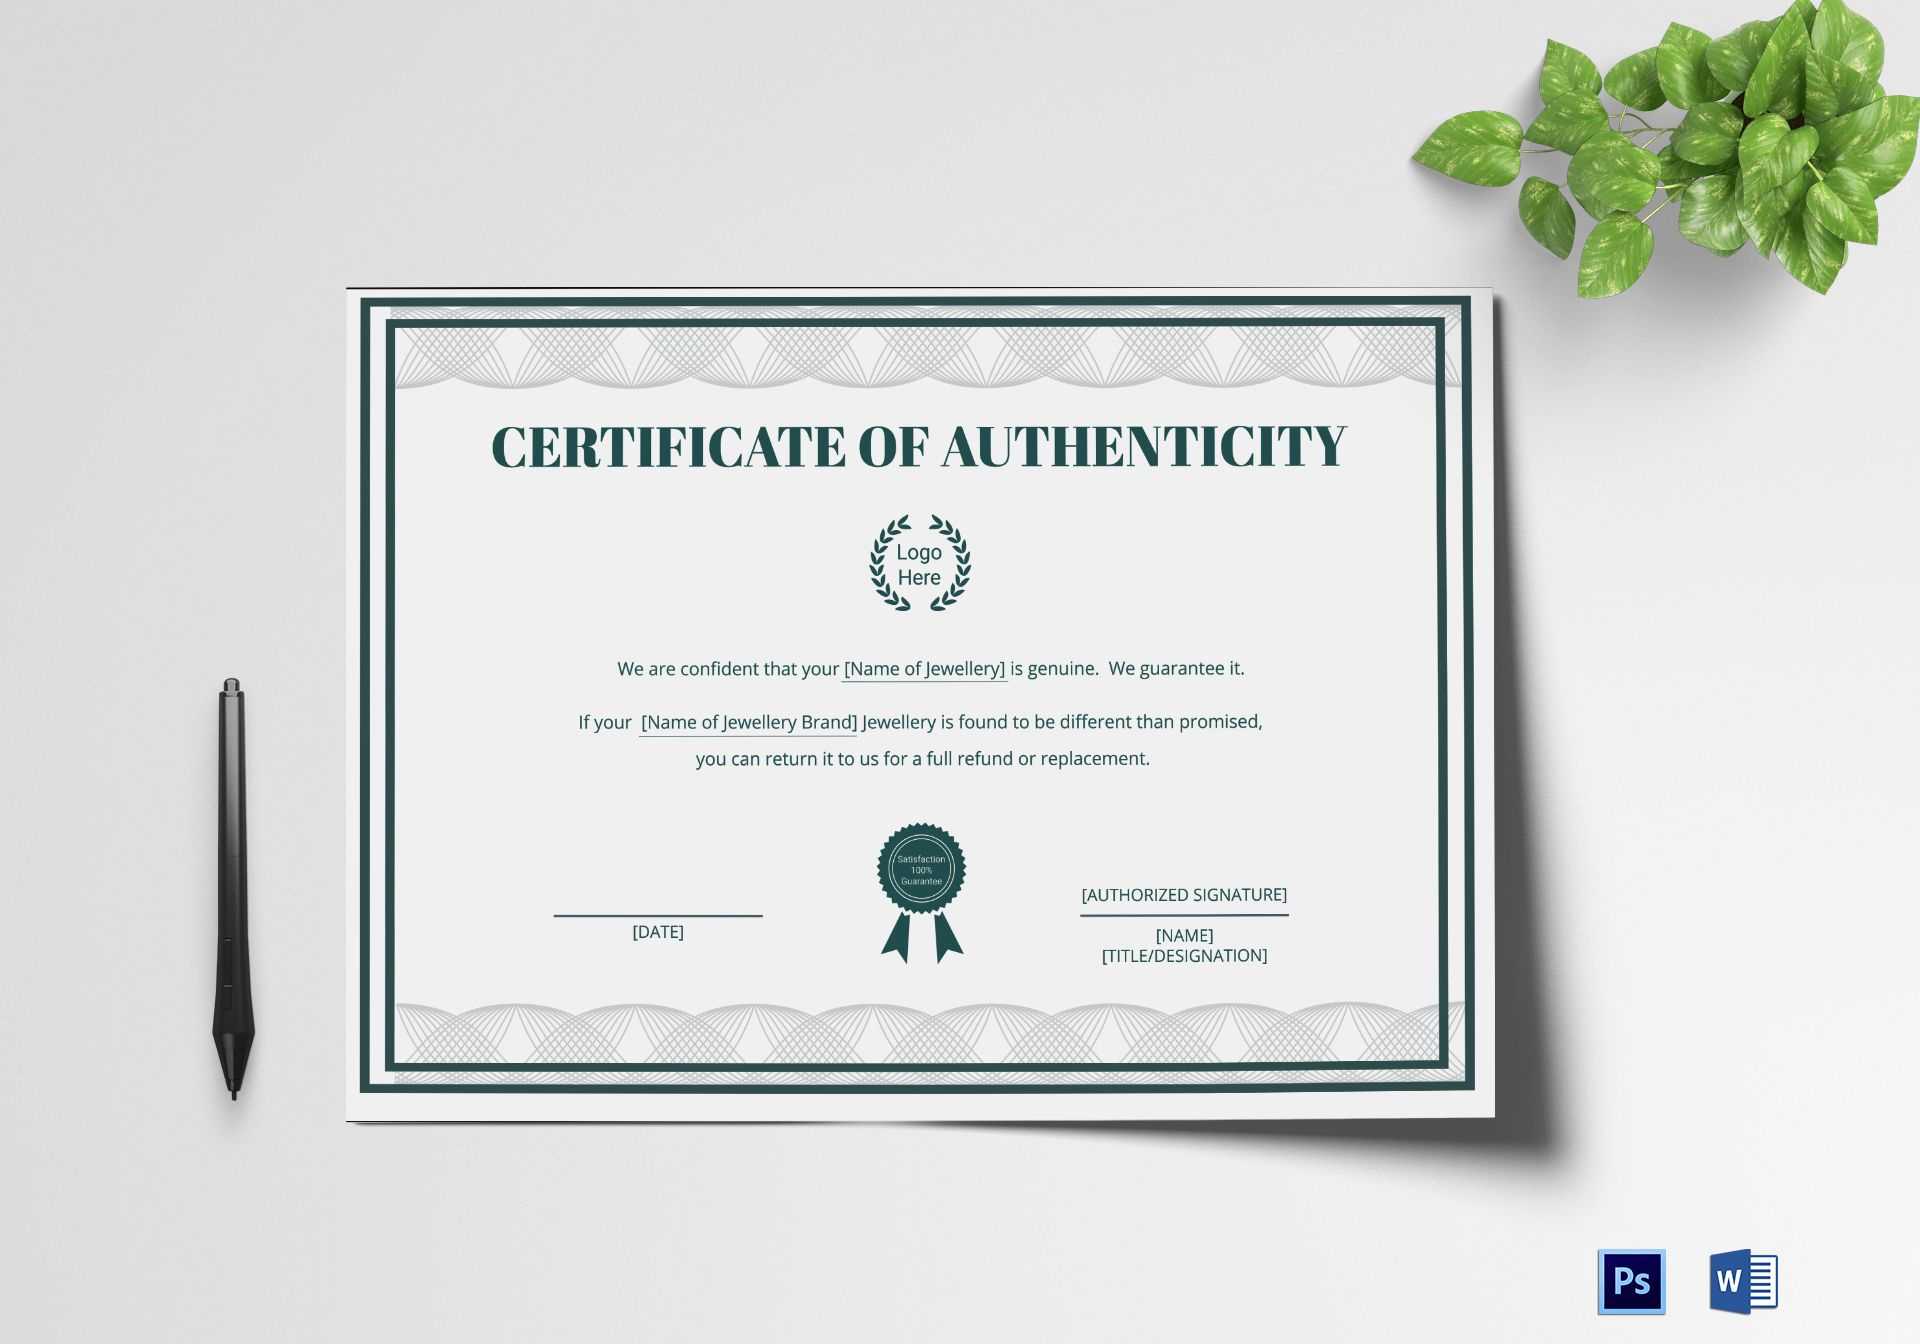 Brand Authenticity Certificate Template With Certificate Of Authenticity Template